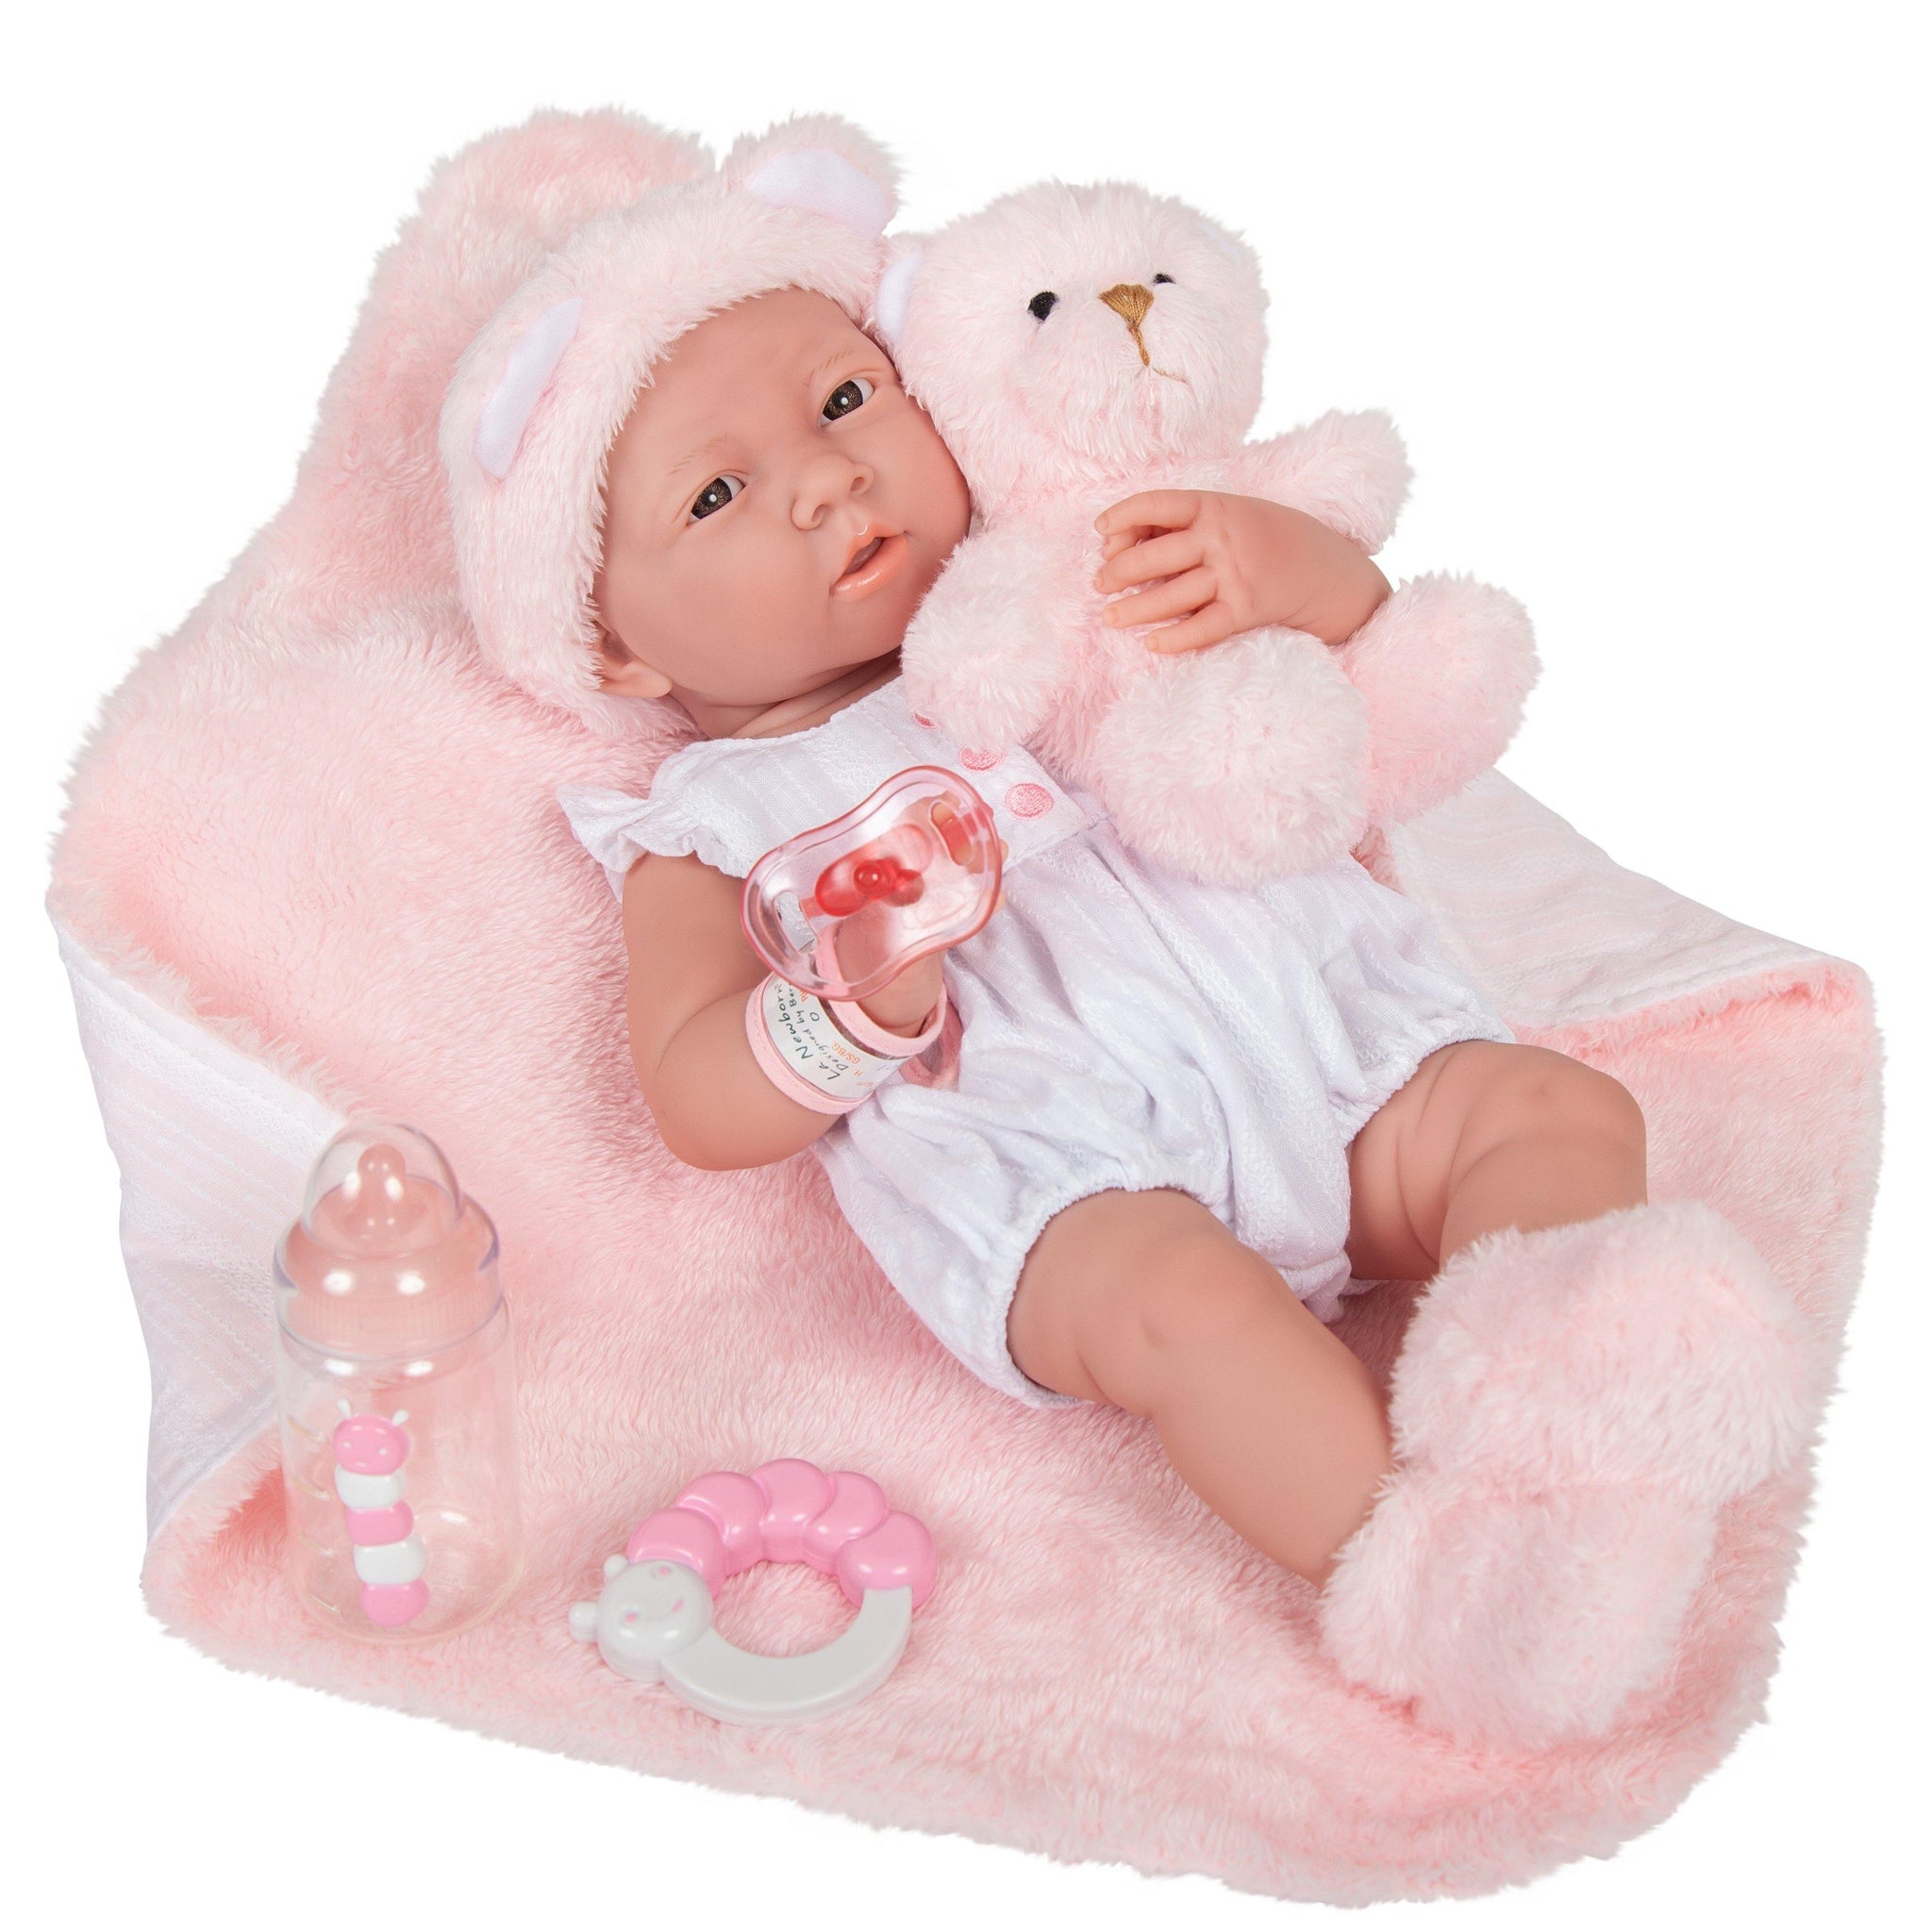 JC Toys,La Newborn All-Vinyl Real Girl 15in Baby Doll-White Outfit & Accessories - JC Toys Group Inc.